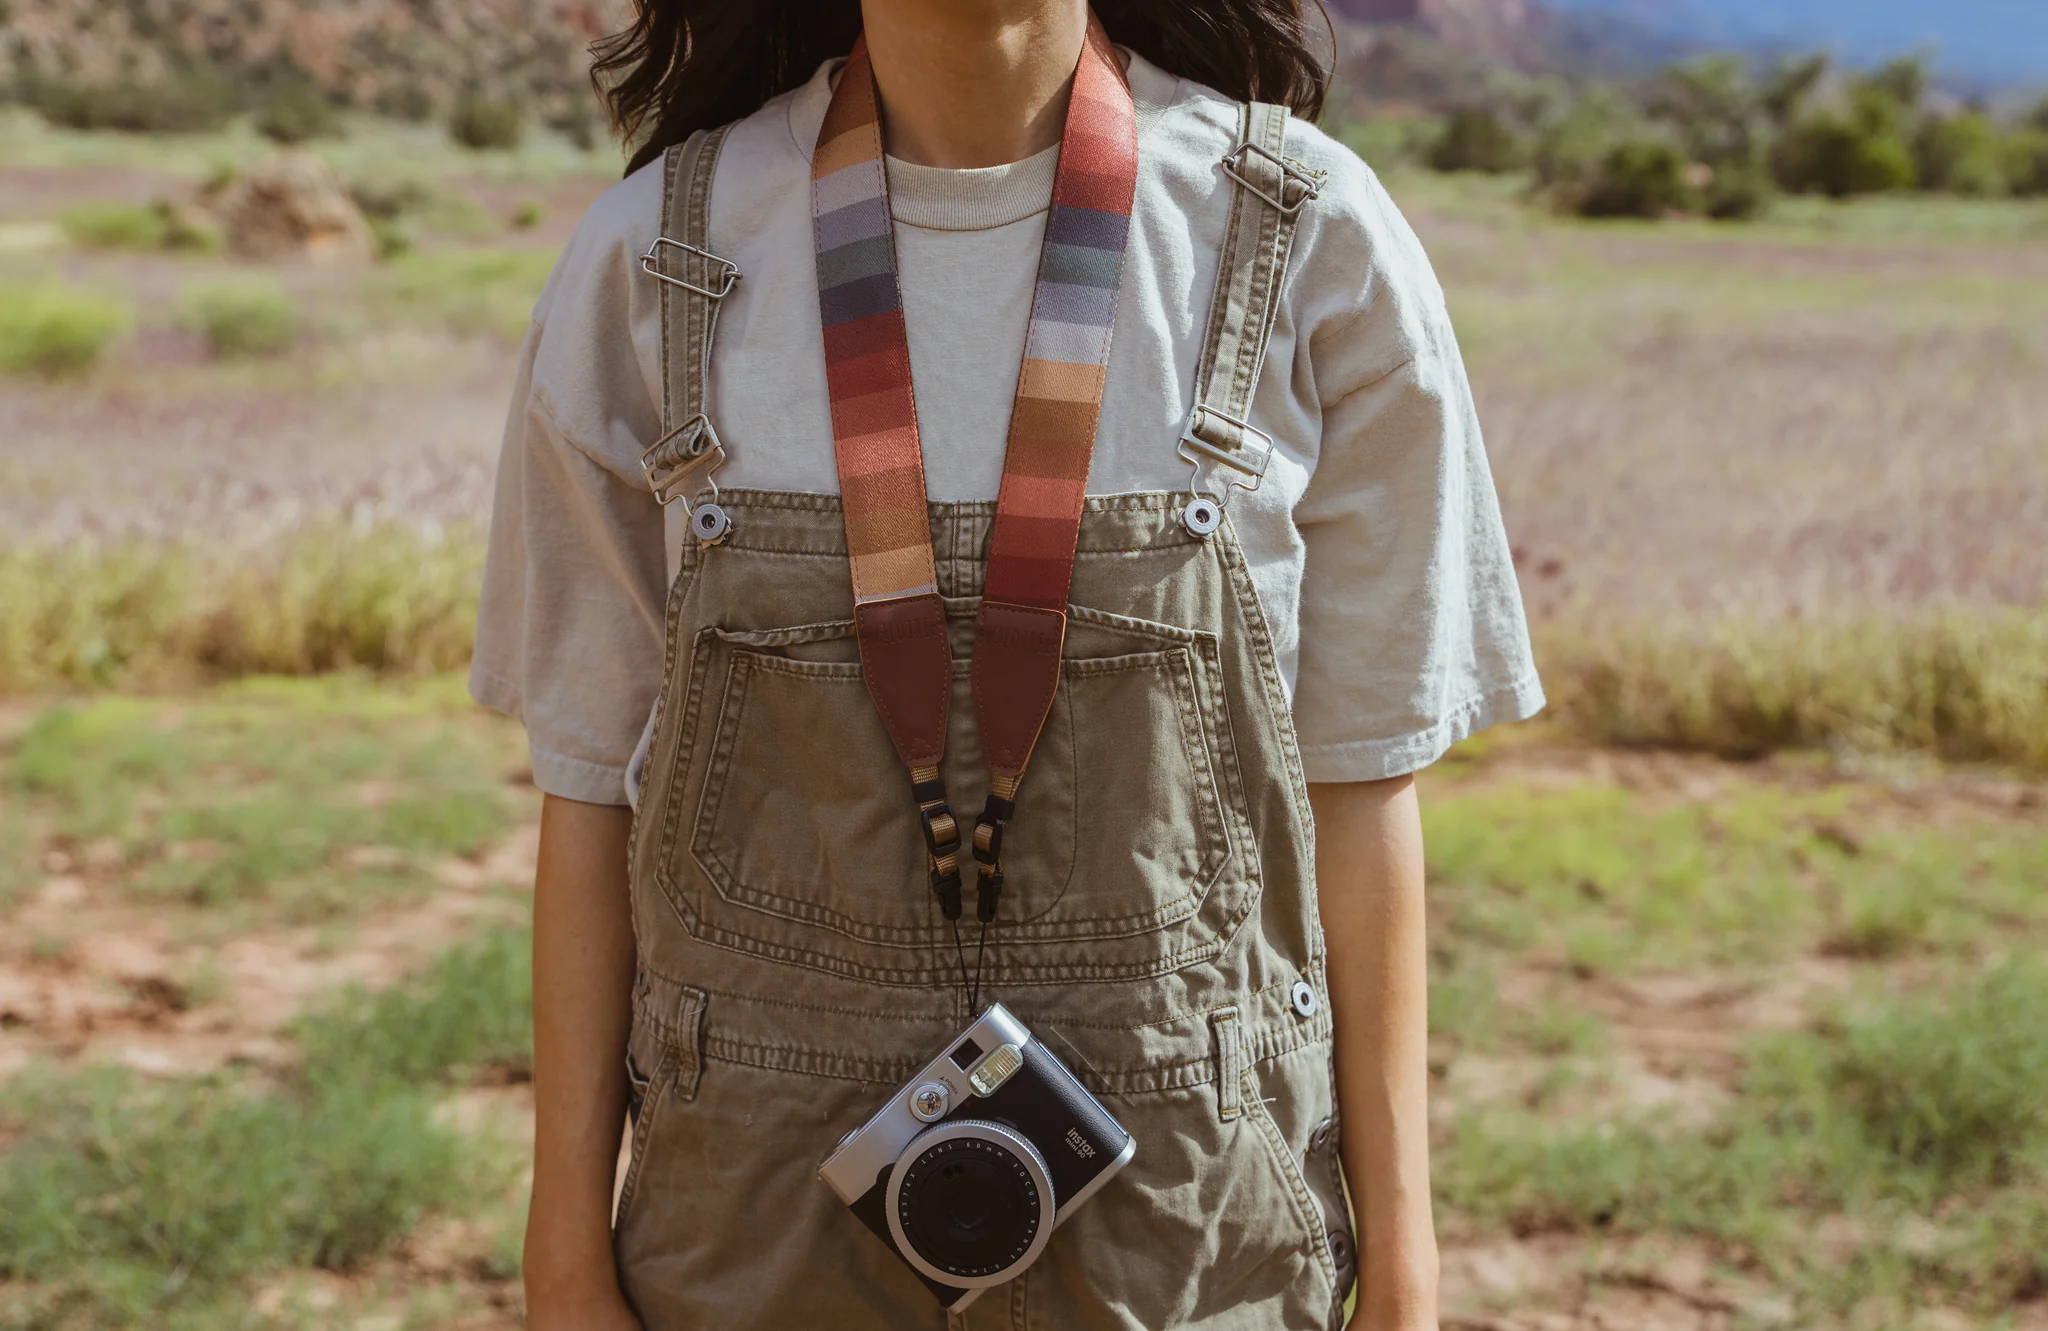 Girl wearing retro striped camera strap and overalls outside.